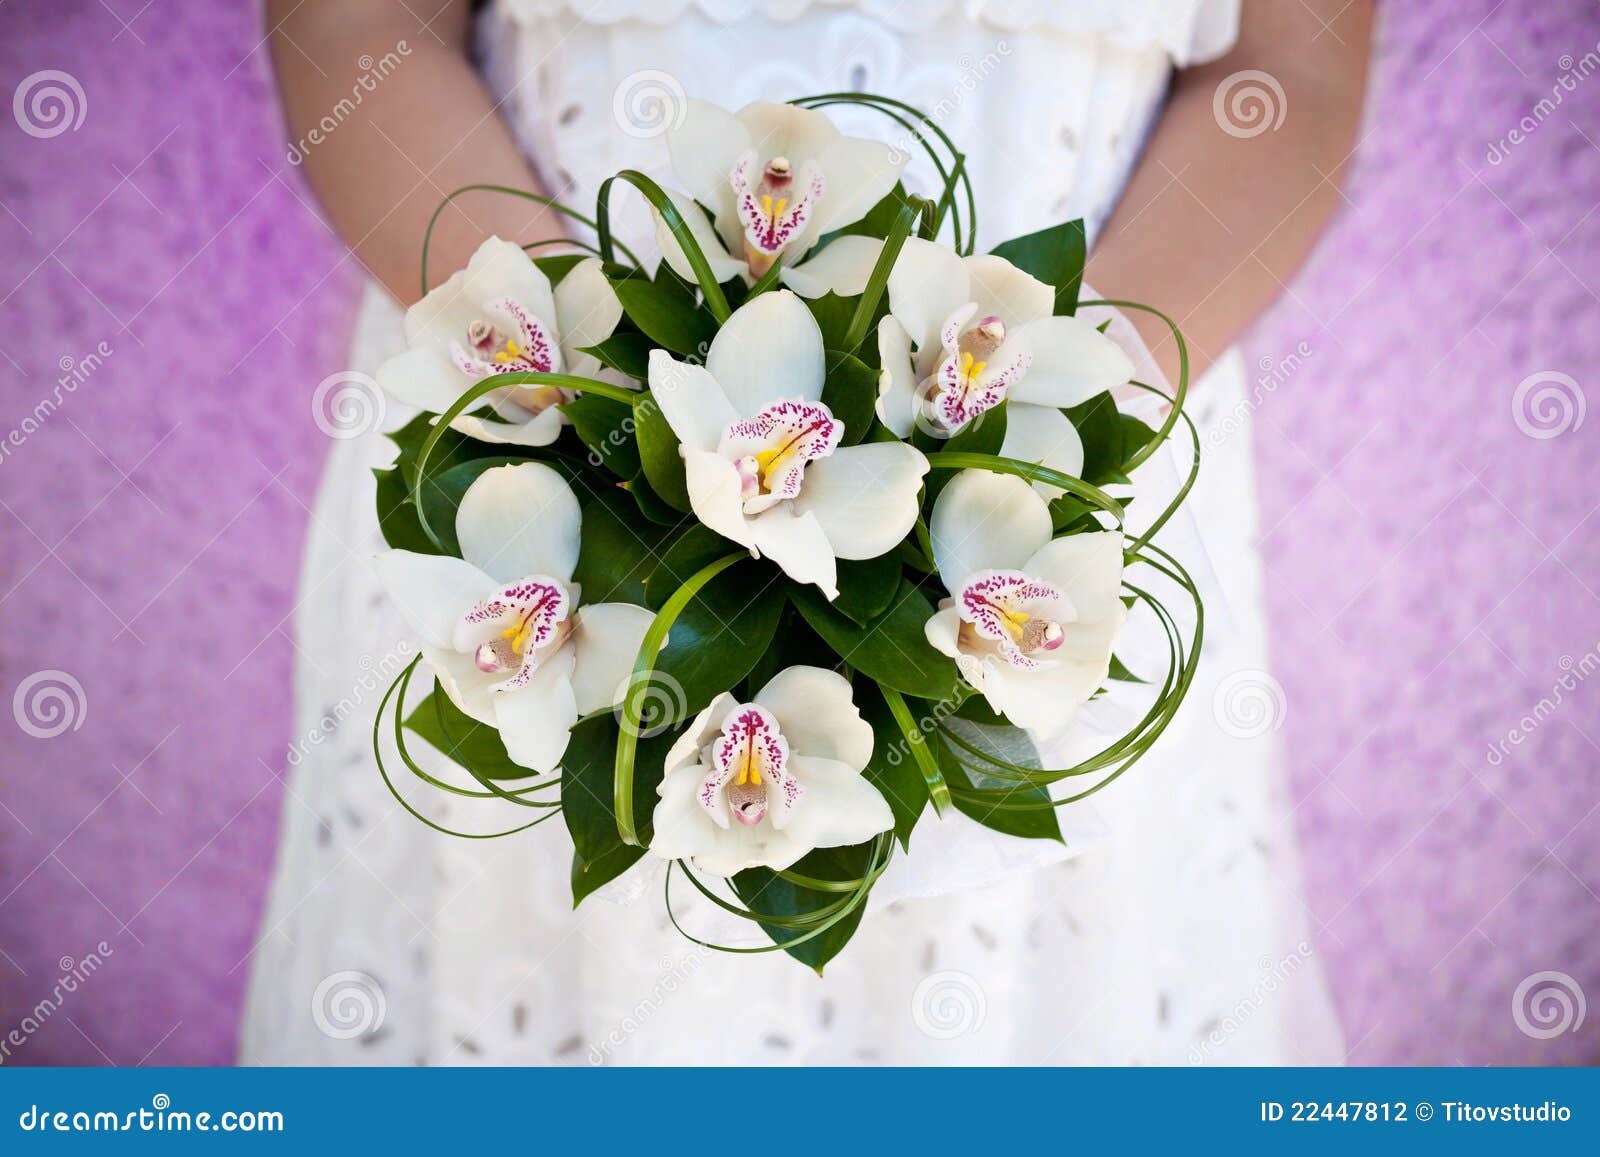 Bouquet of orchids stock photo. Image of lace, beautiful - 22447812